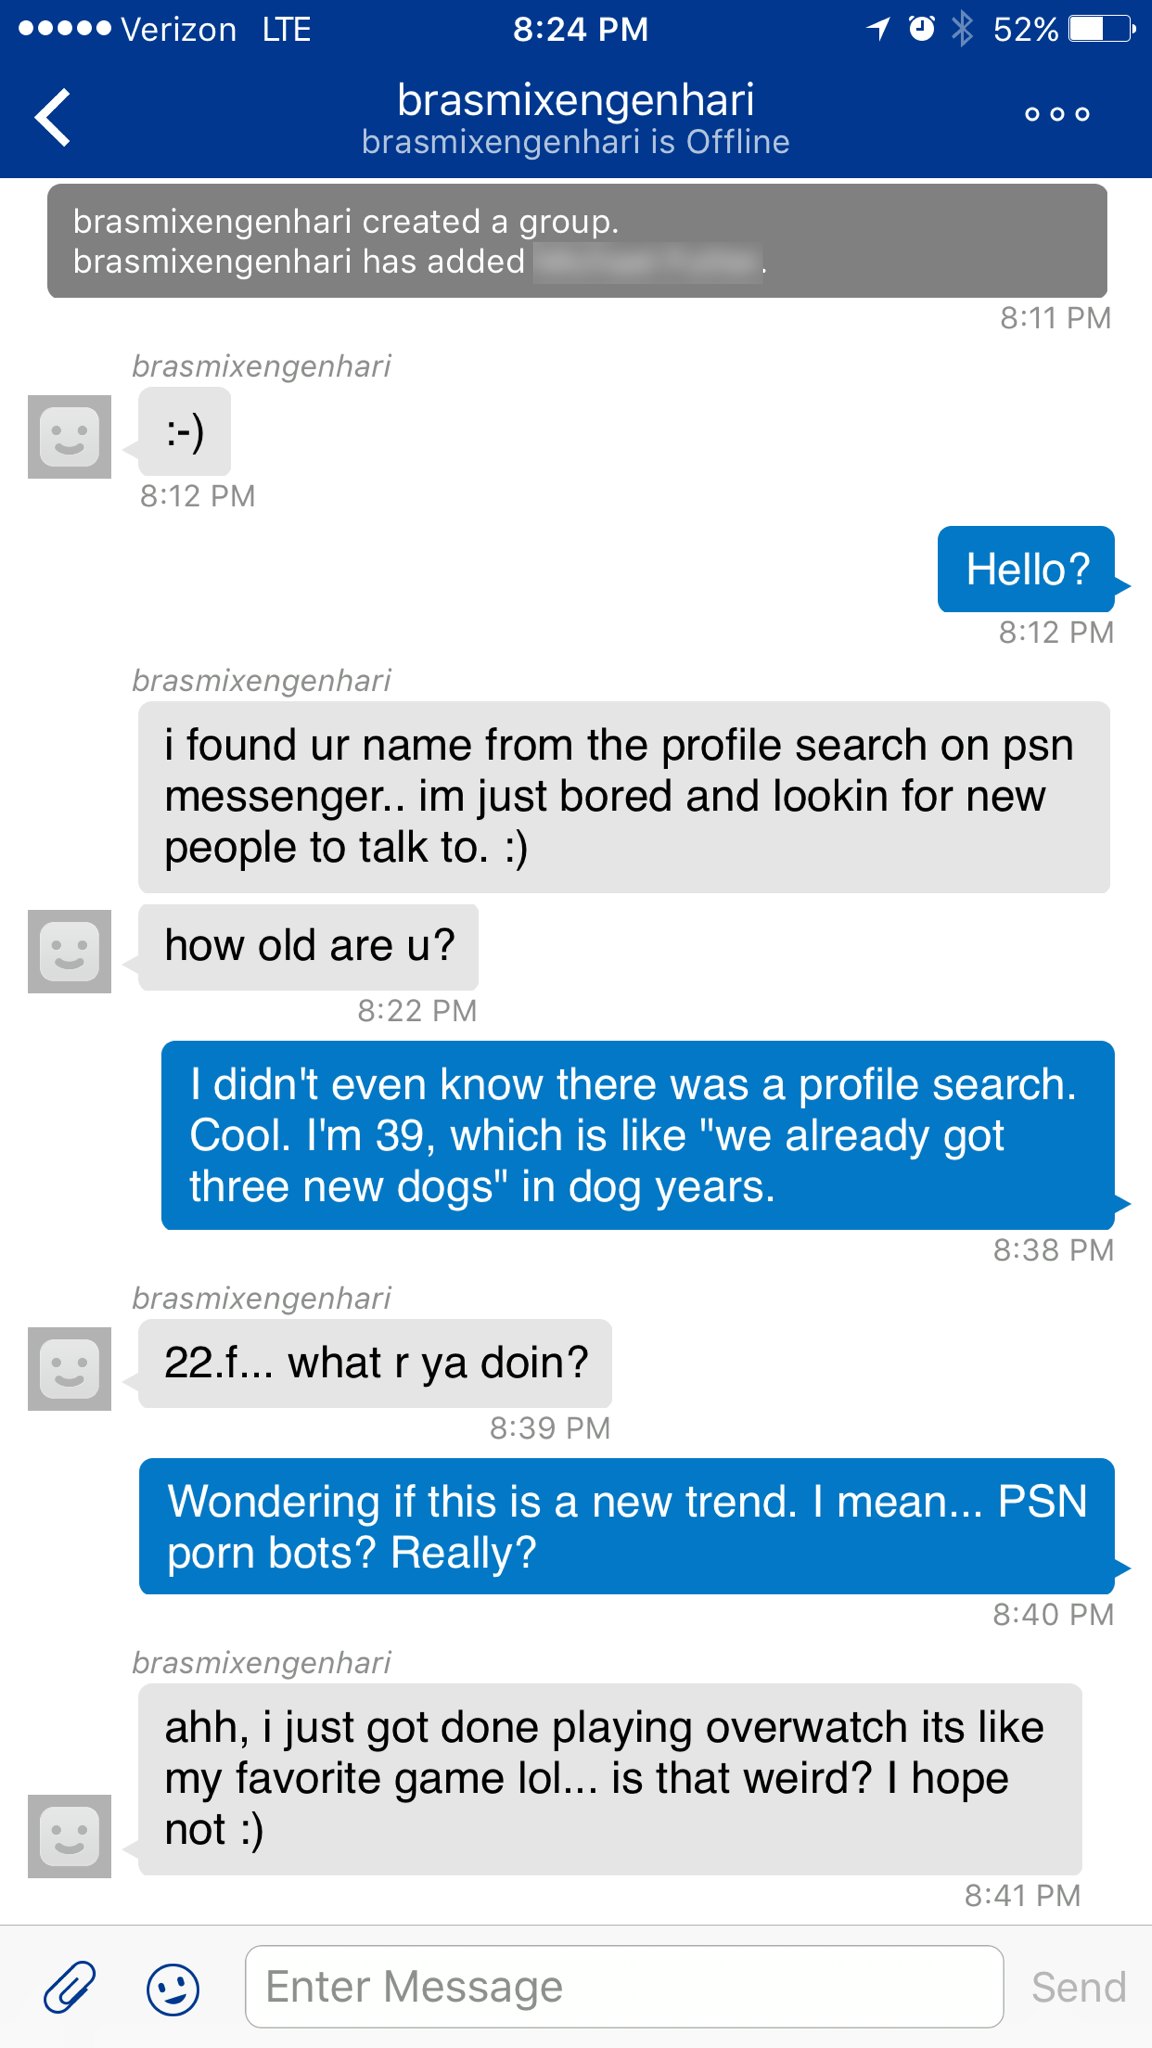 Sony Live Sexy Video - PlayStation Network and Xbox Live have a porn bot spam problem